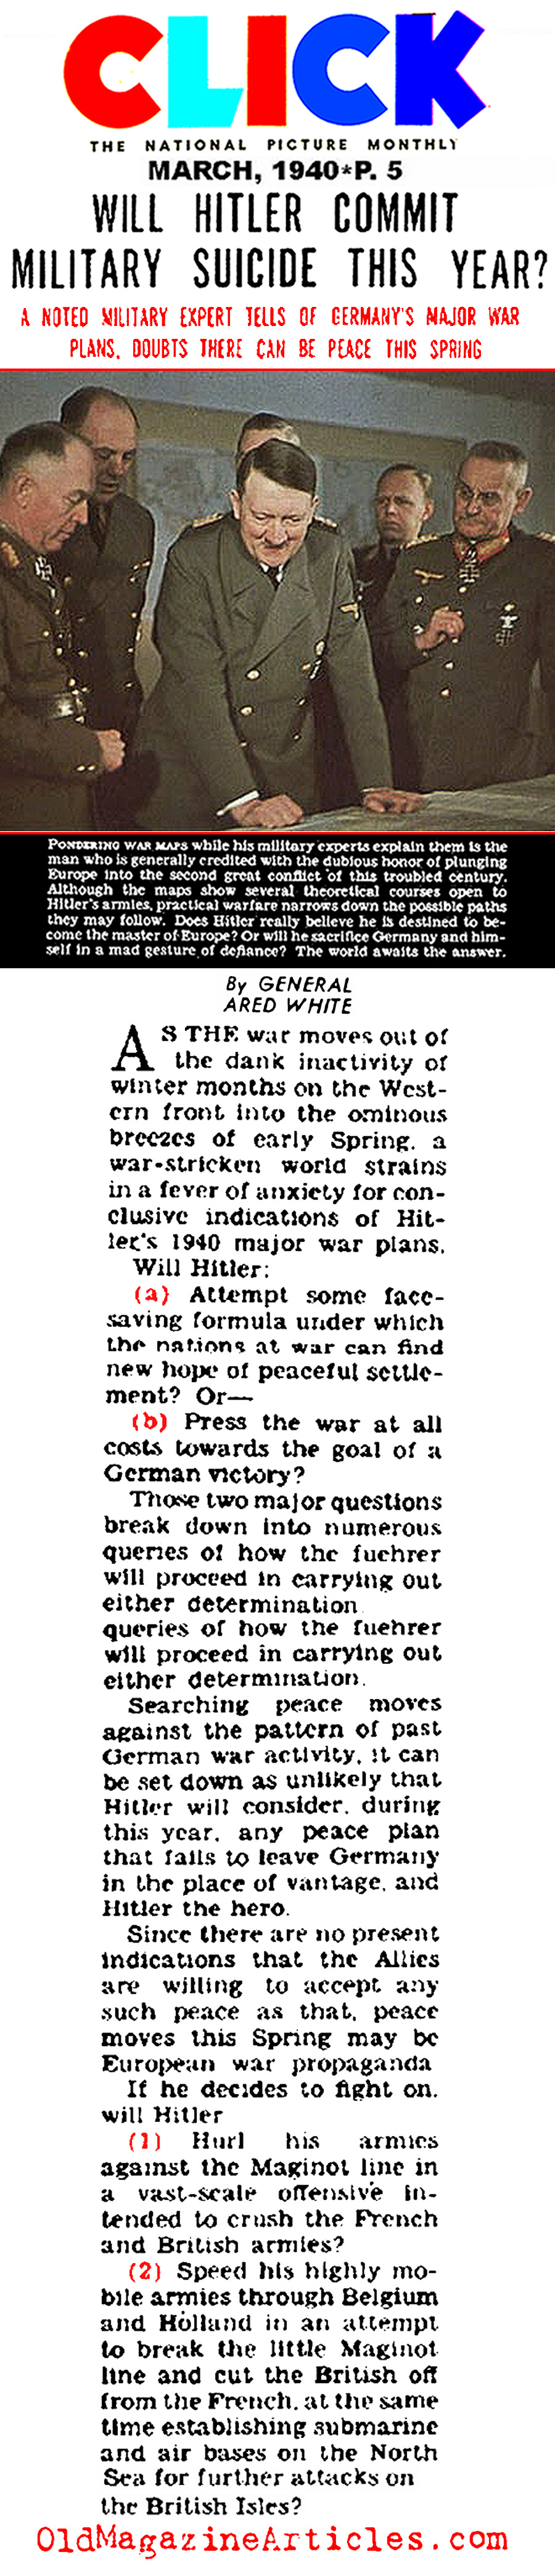 Hitler's Military Options in 1940 (Click Magazine, 1940)